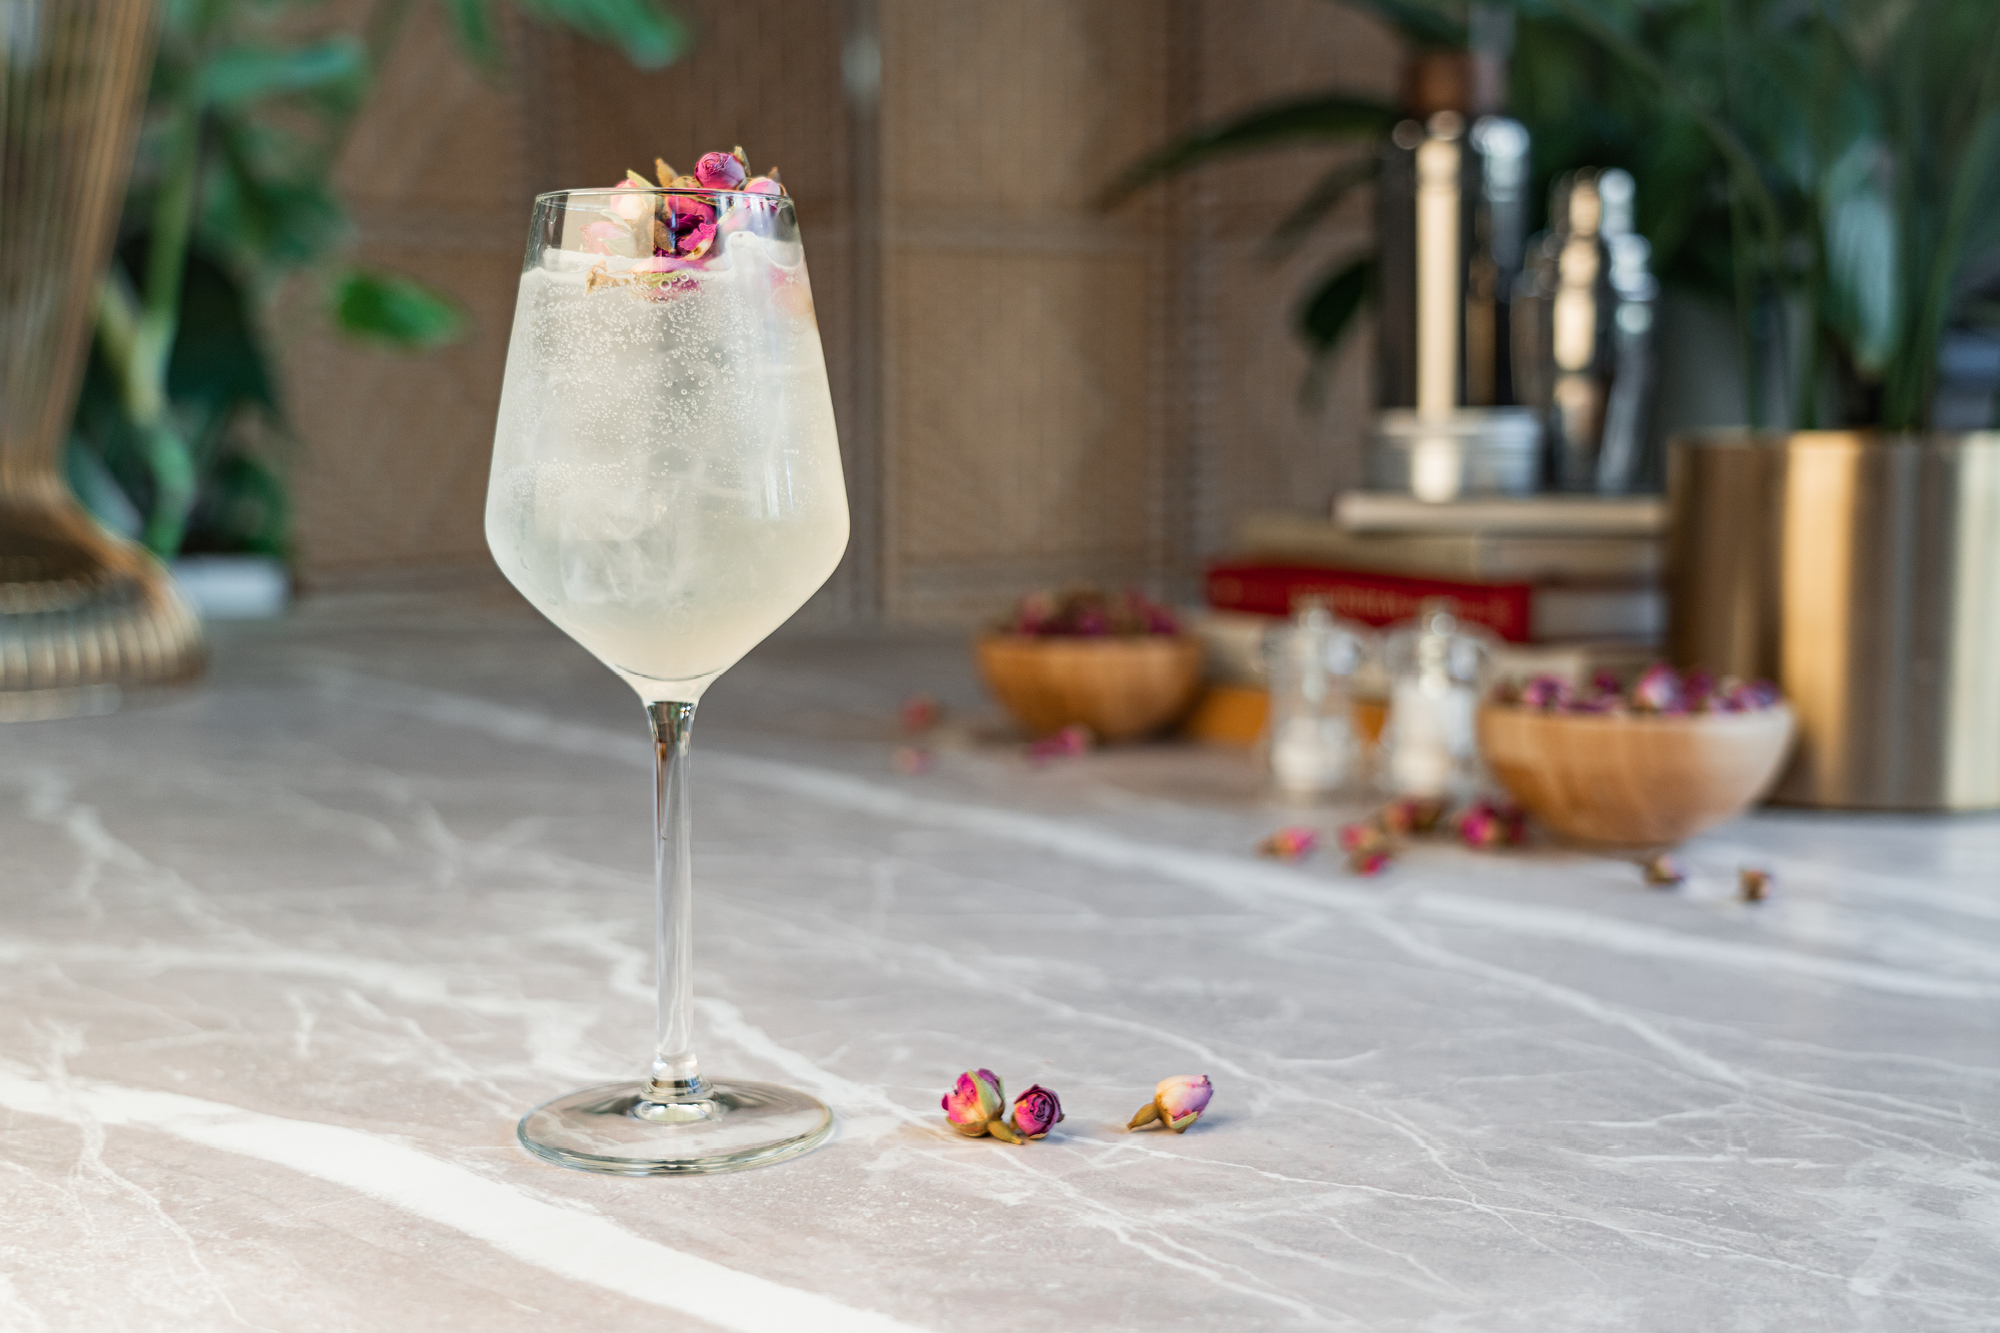 The “Le Fizz” spritz is one of the cocktails currently available from Cocktail Porter